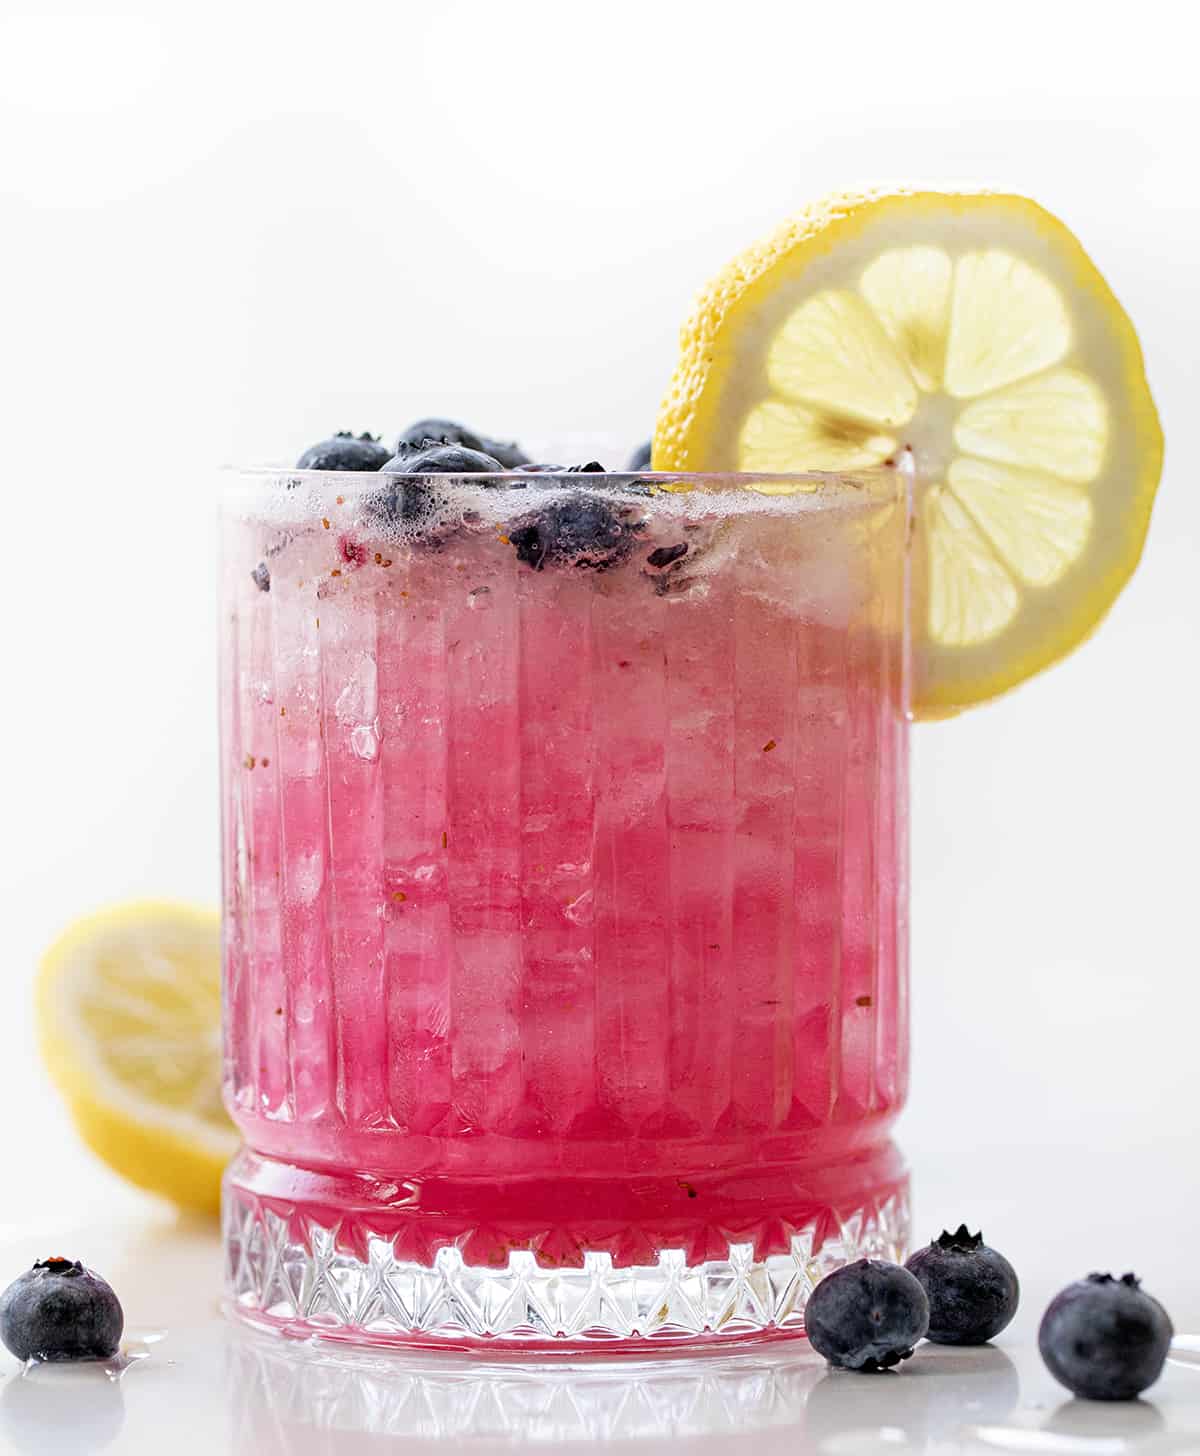 Glass of Spiked Blueberry Lemonade that is Backlit and Has a Lemon Wheel. 